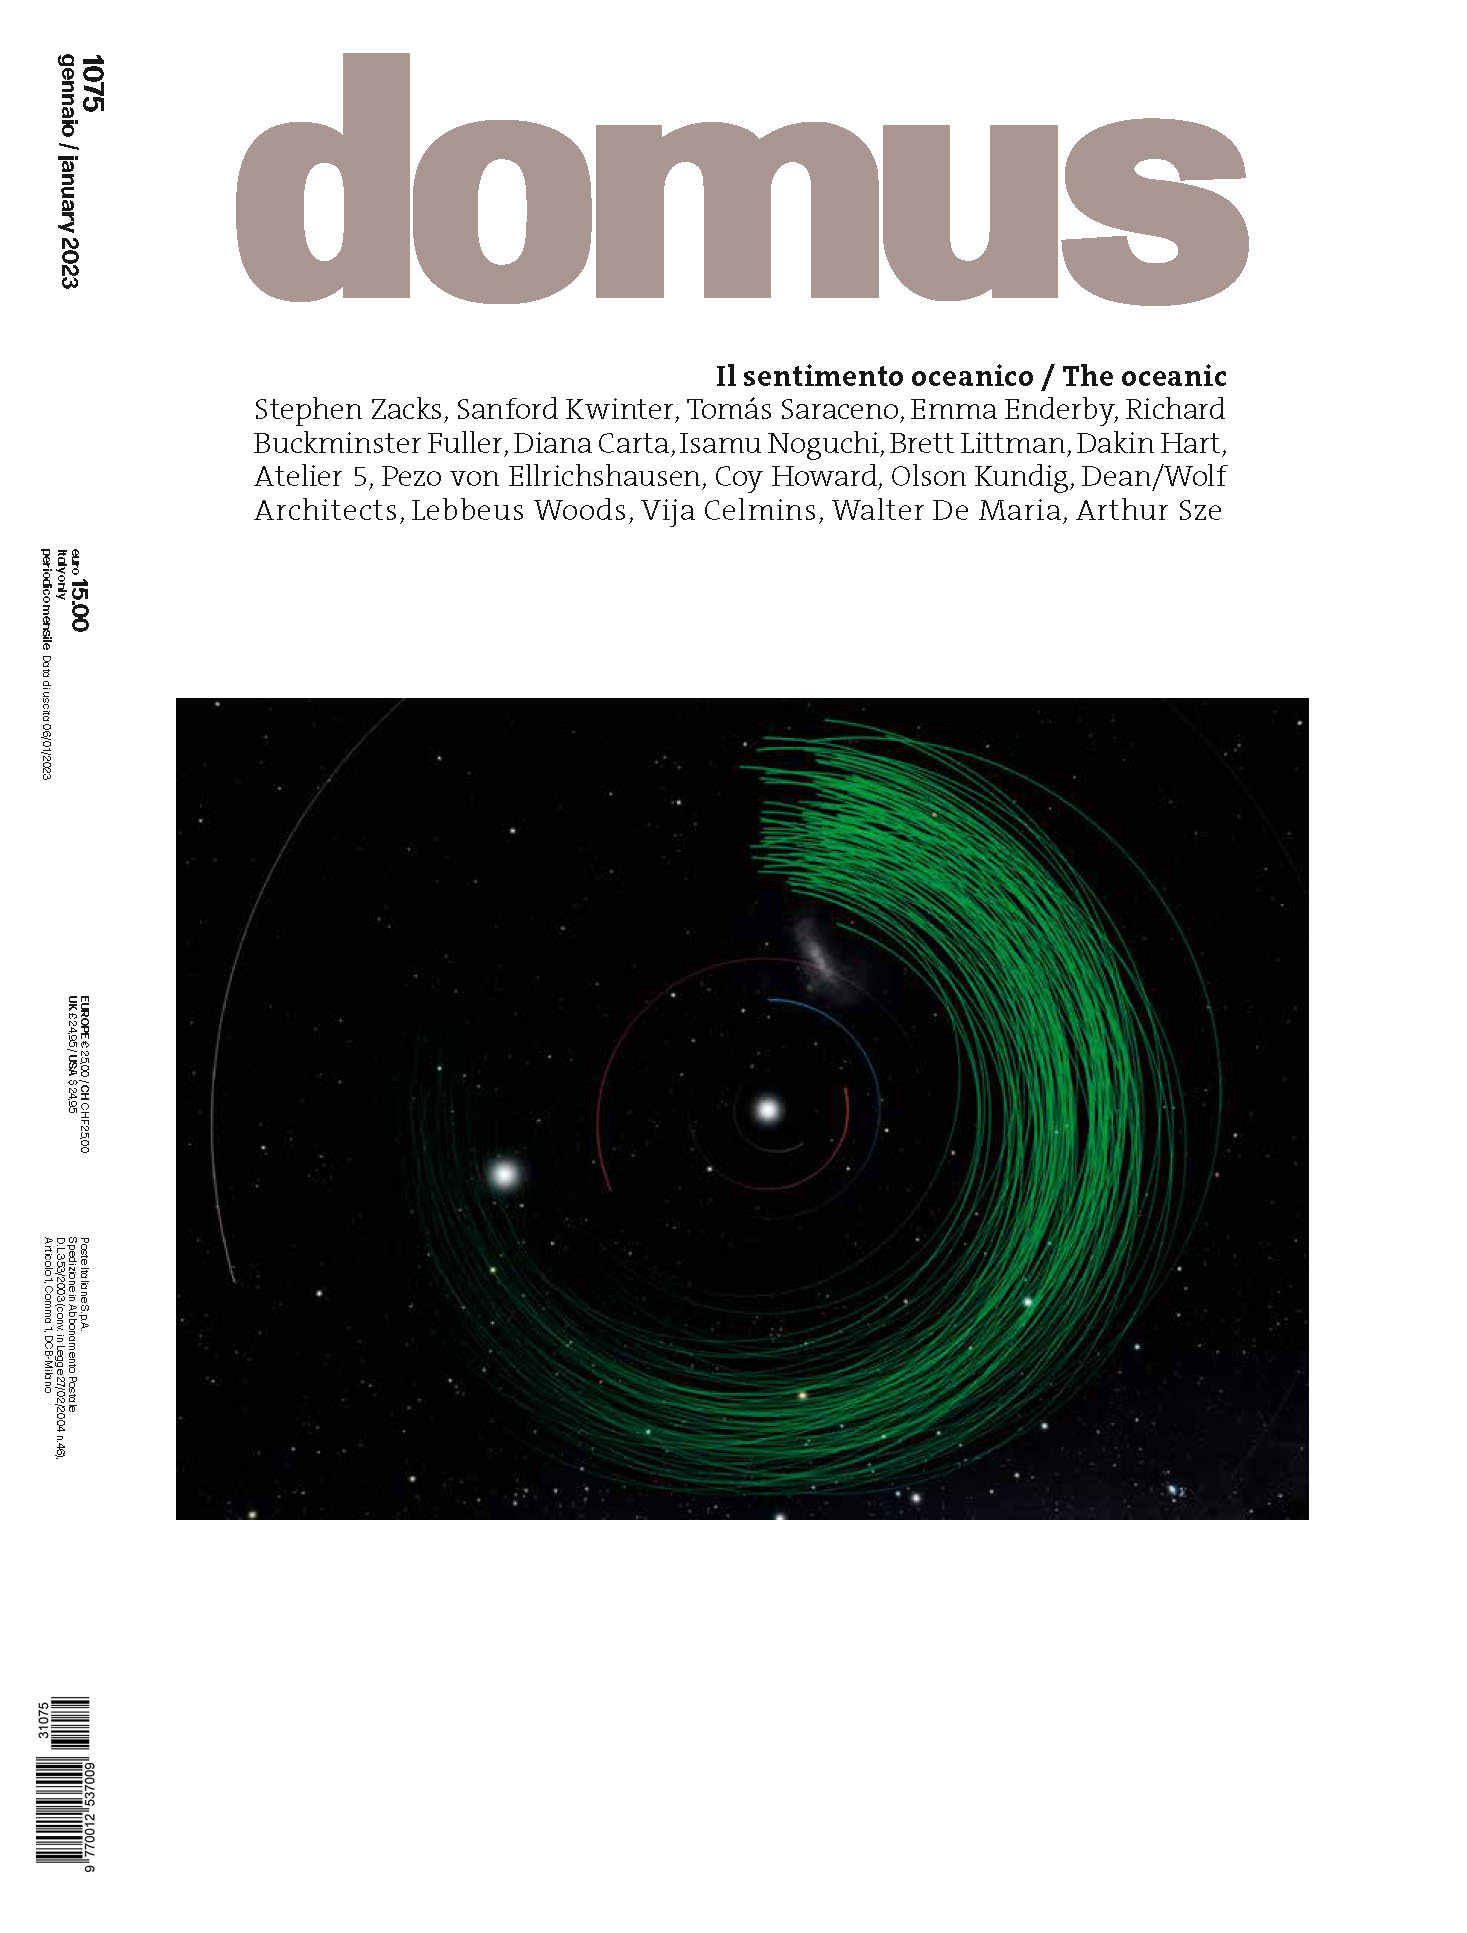 Domus January Issue “The Oceanic” Now Available